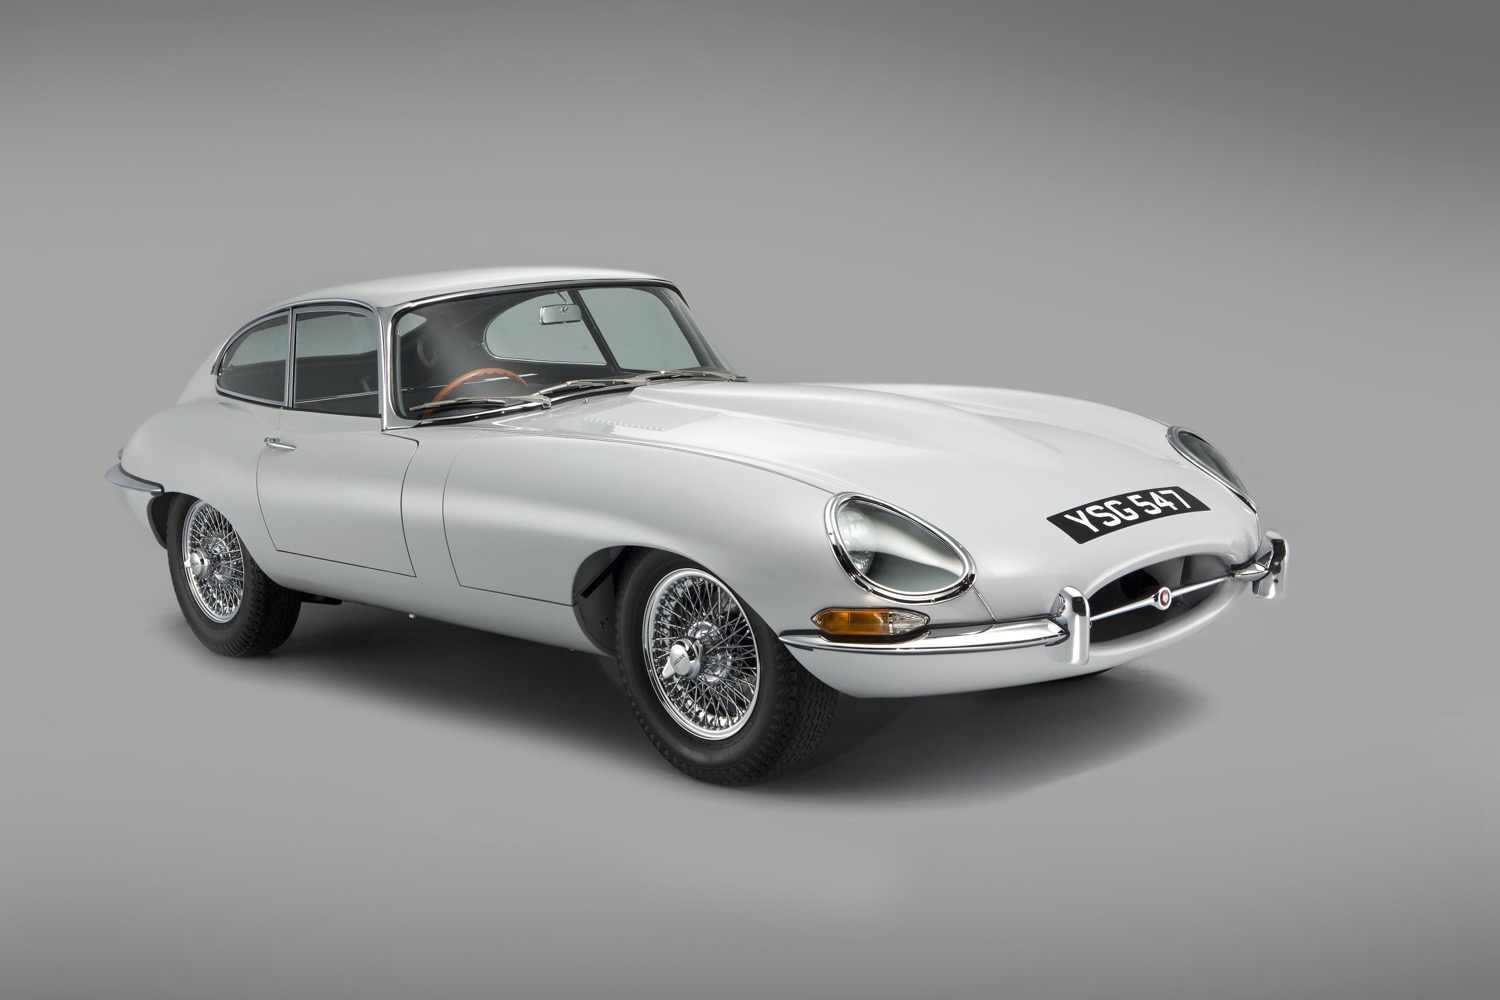 Barely Recognizable 1961 Jaguar E-Type Restored To Former Glory